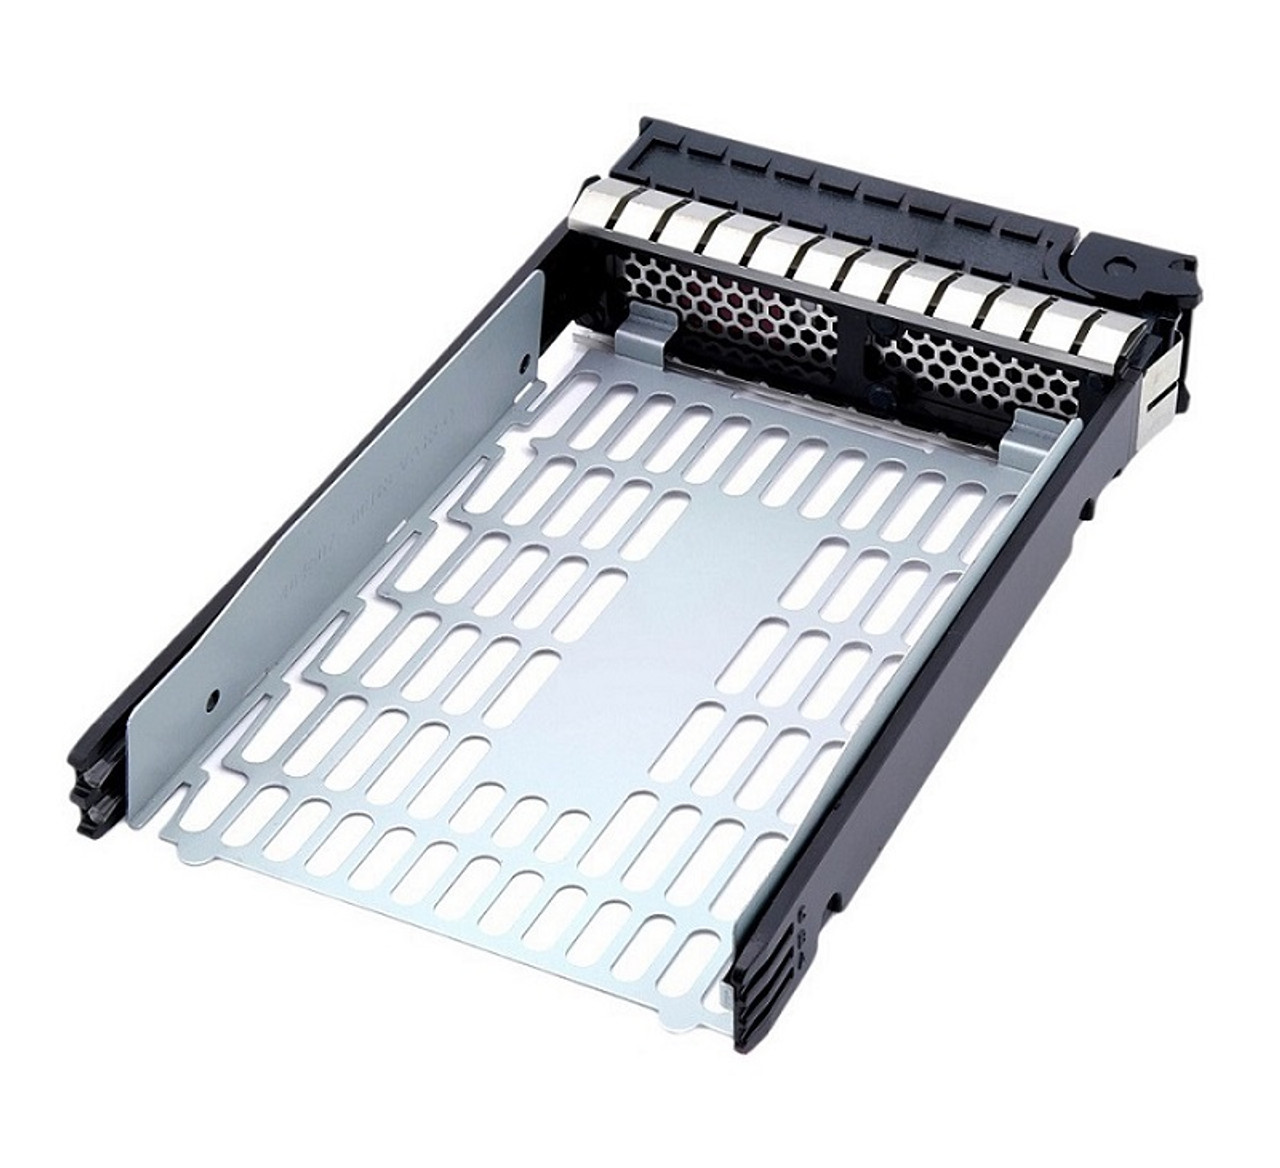 G9146 - Dell 3.5-inch Hot-pluggable SAS/SATA Hard Drive Tray Sled Caddy for PowerEdge and PowerVault Servers